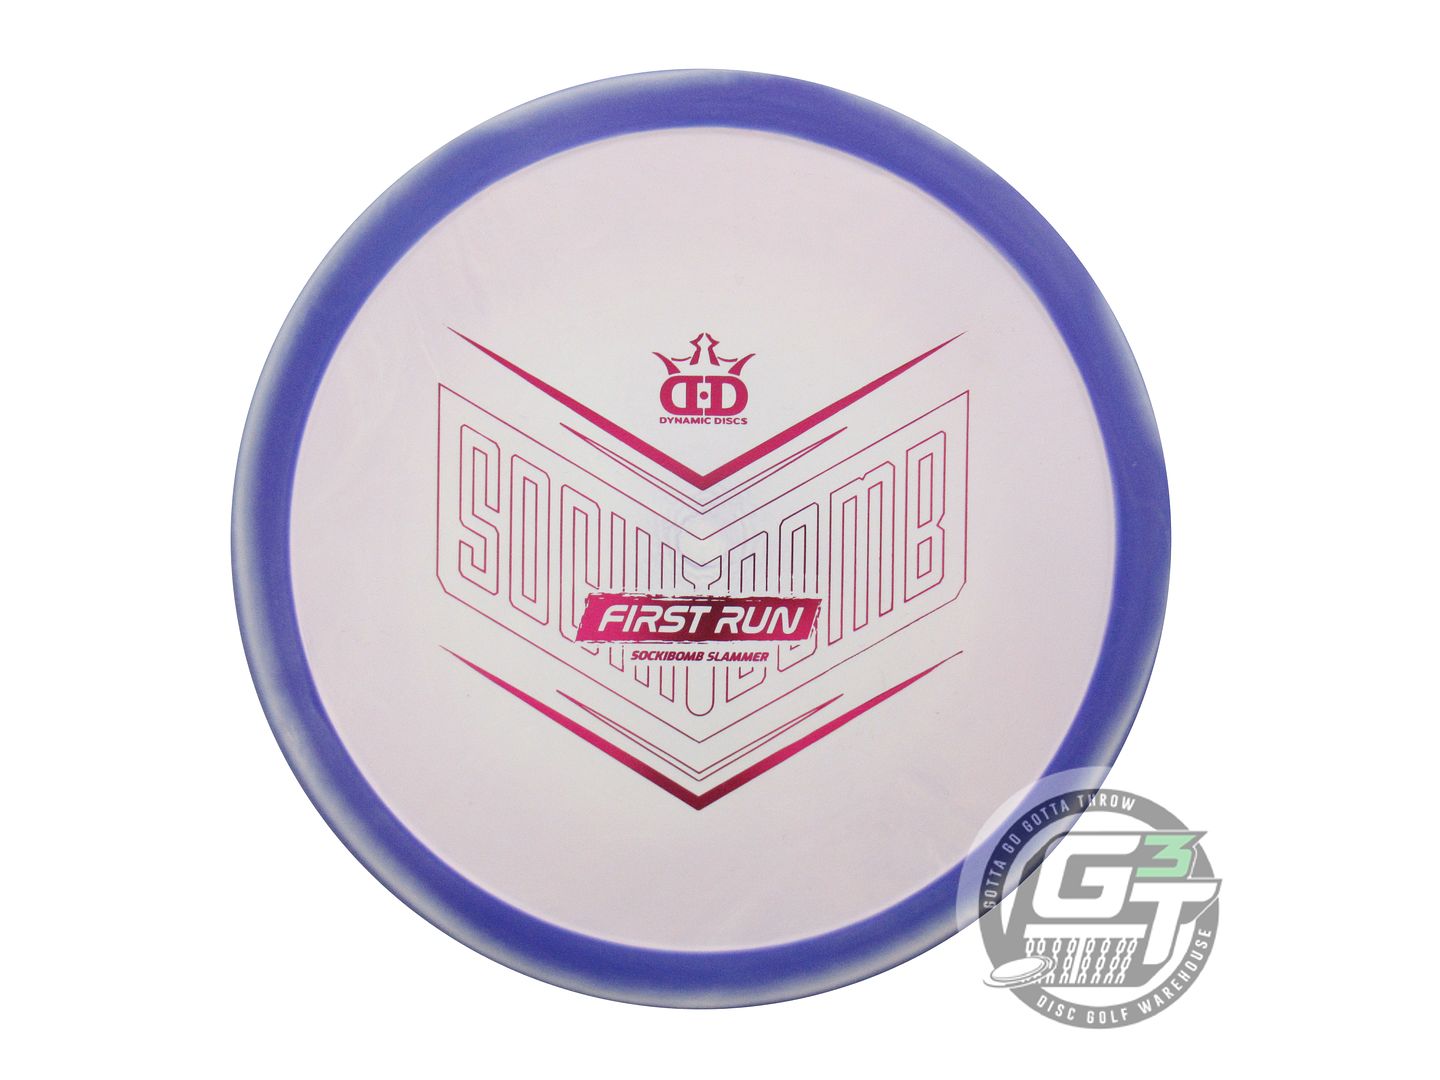 Dynamic Discs Limited Edition First Run Ricky Wysocki Classic Supreme Orbit Sockibomb Slammer Putter Golf Disc (Individually Listed)